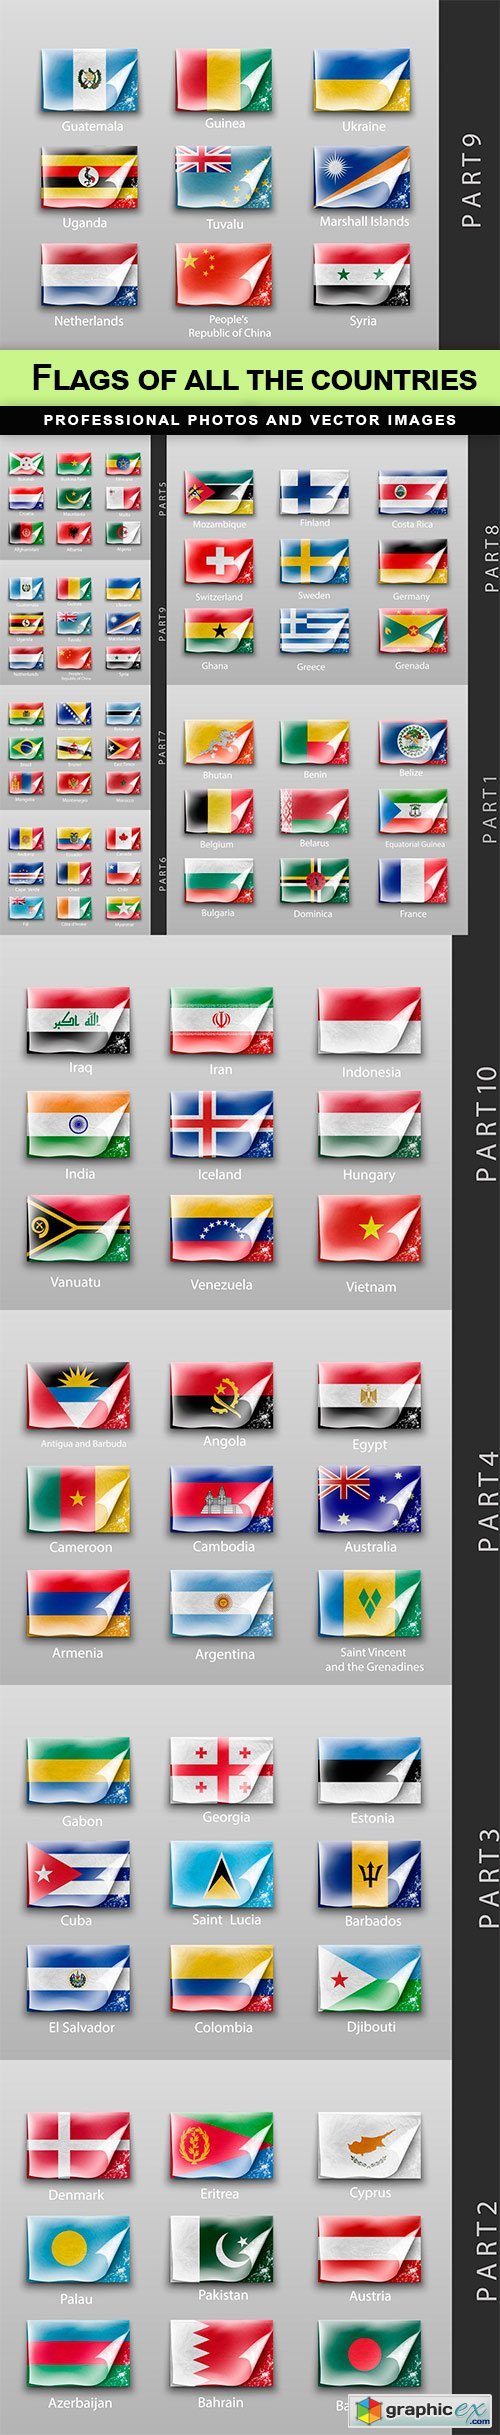 Flags of all the countries - 10 EPS